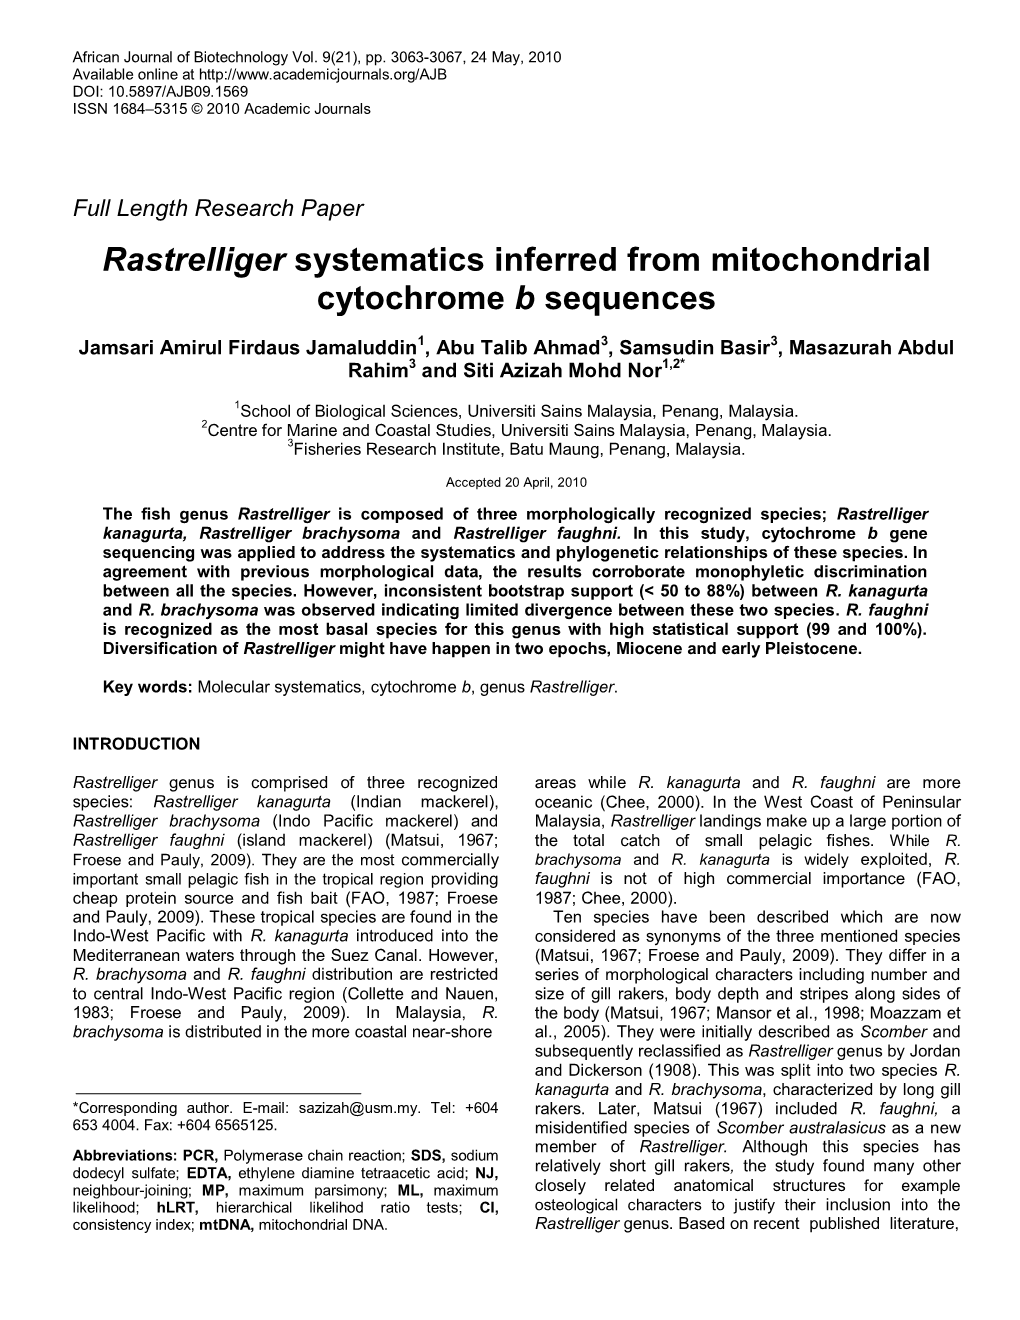 Rastrelliger Systematics Inferred from Mitochondrial Cytochrome B Sequences